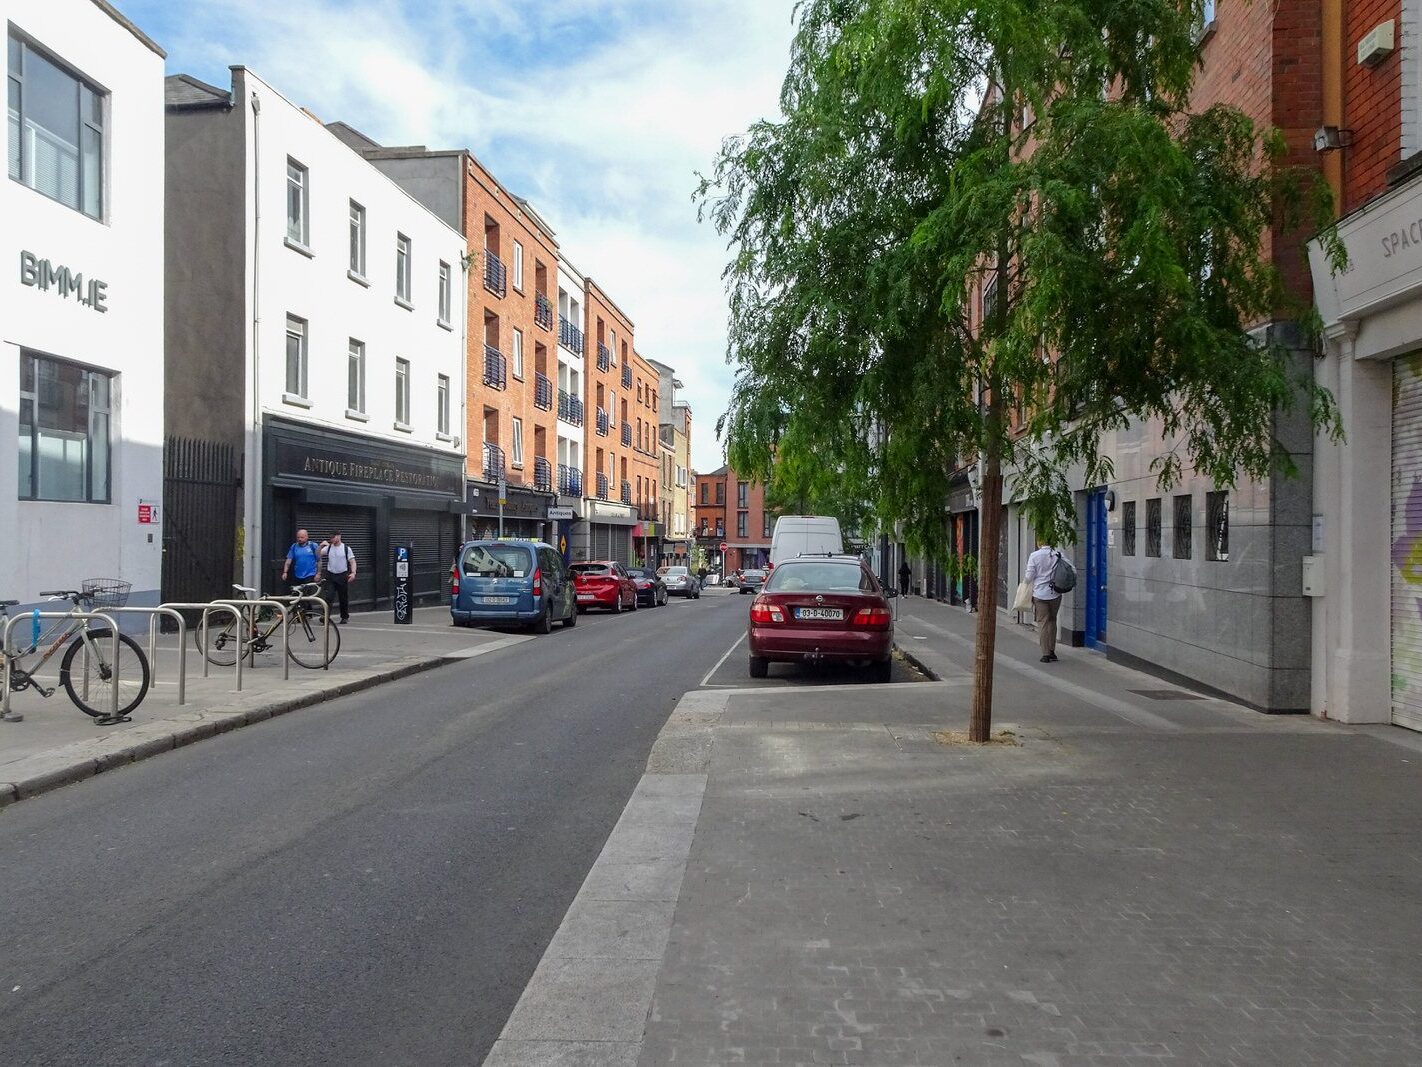 THE FRANCIS STREET UPGRADE HAS BEEN A HUGE A SUCCESS [MEATH STREET IS NEXT FOR AN UPGRADE]-236799-1